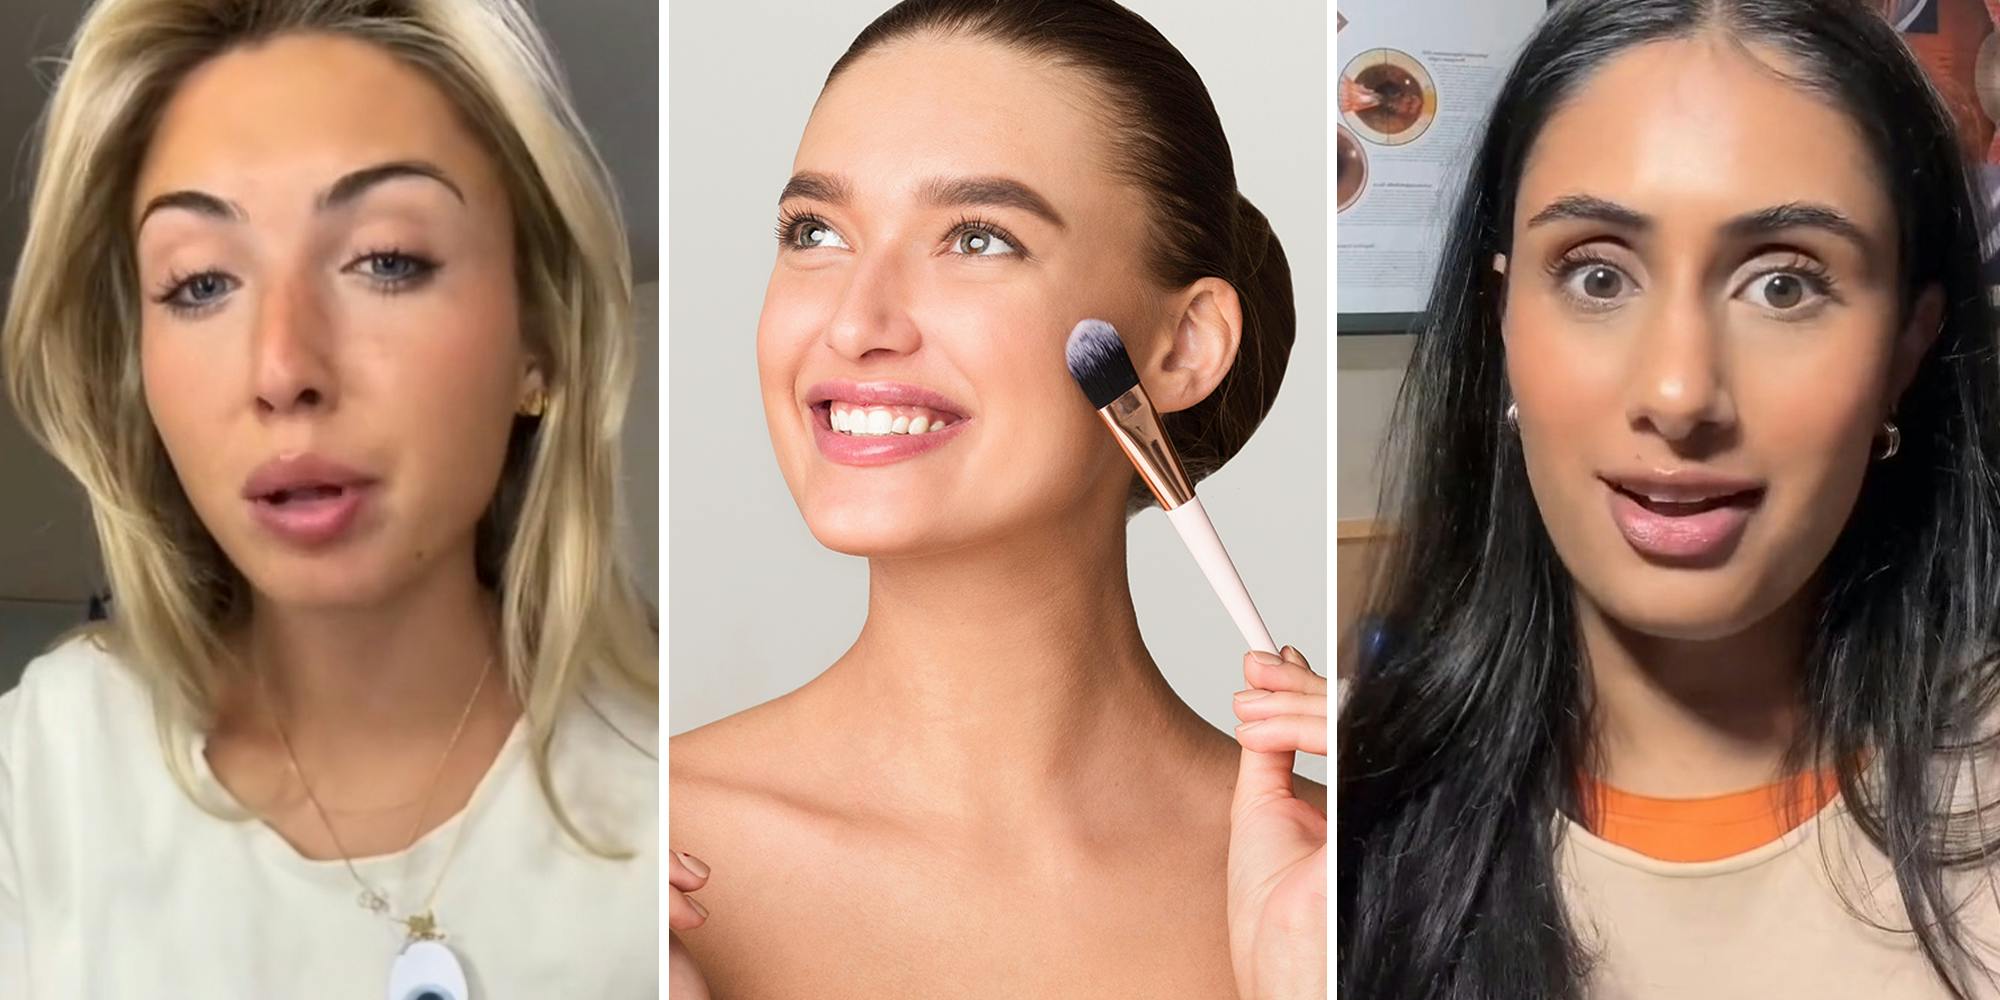 Expert explains why you may feel itchy after applying makeup